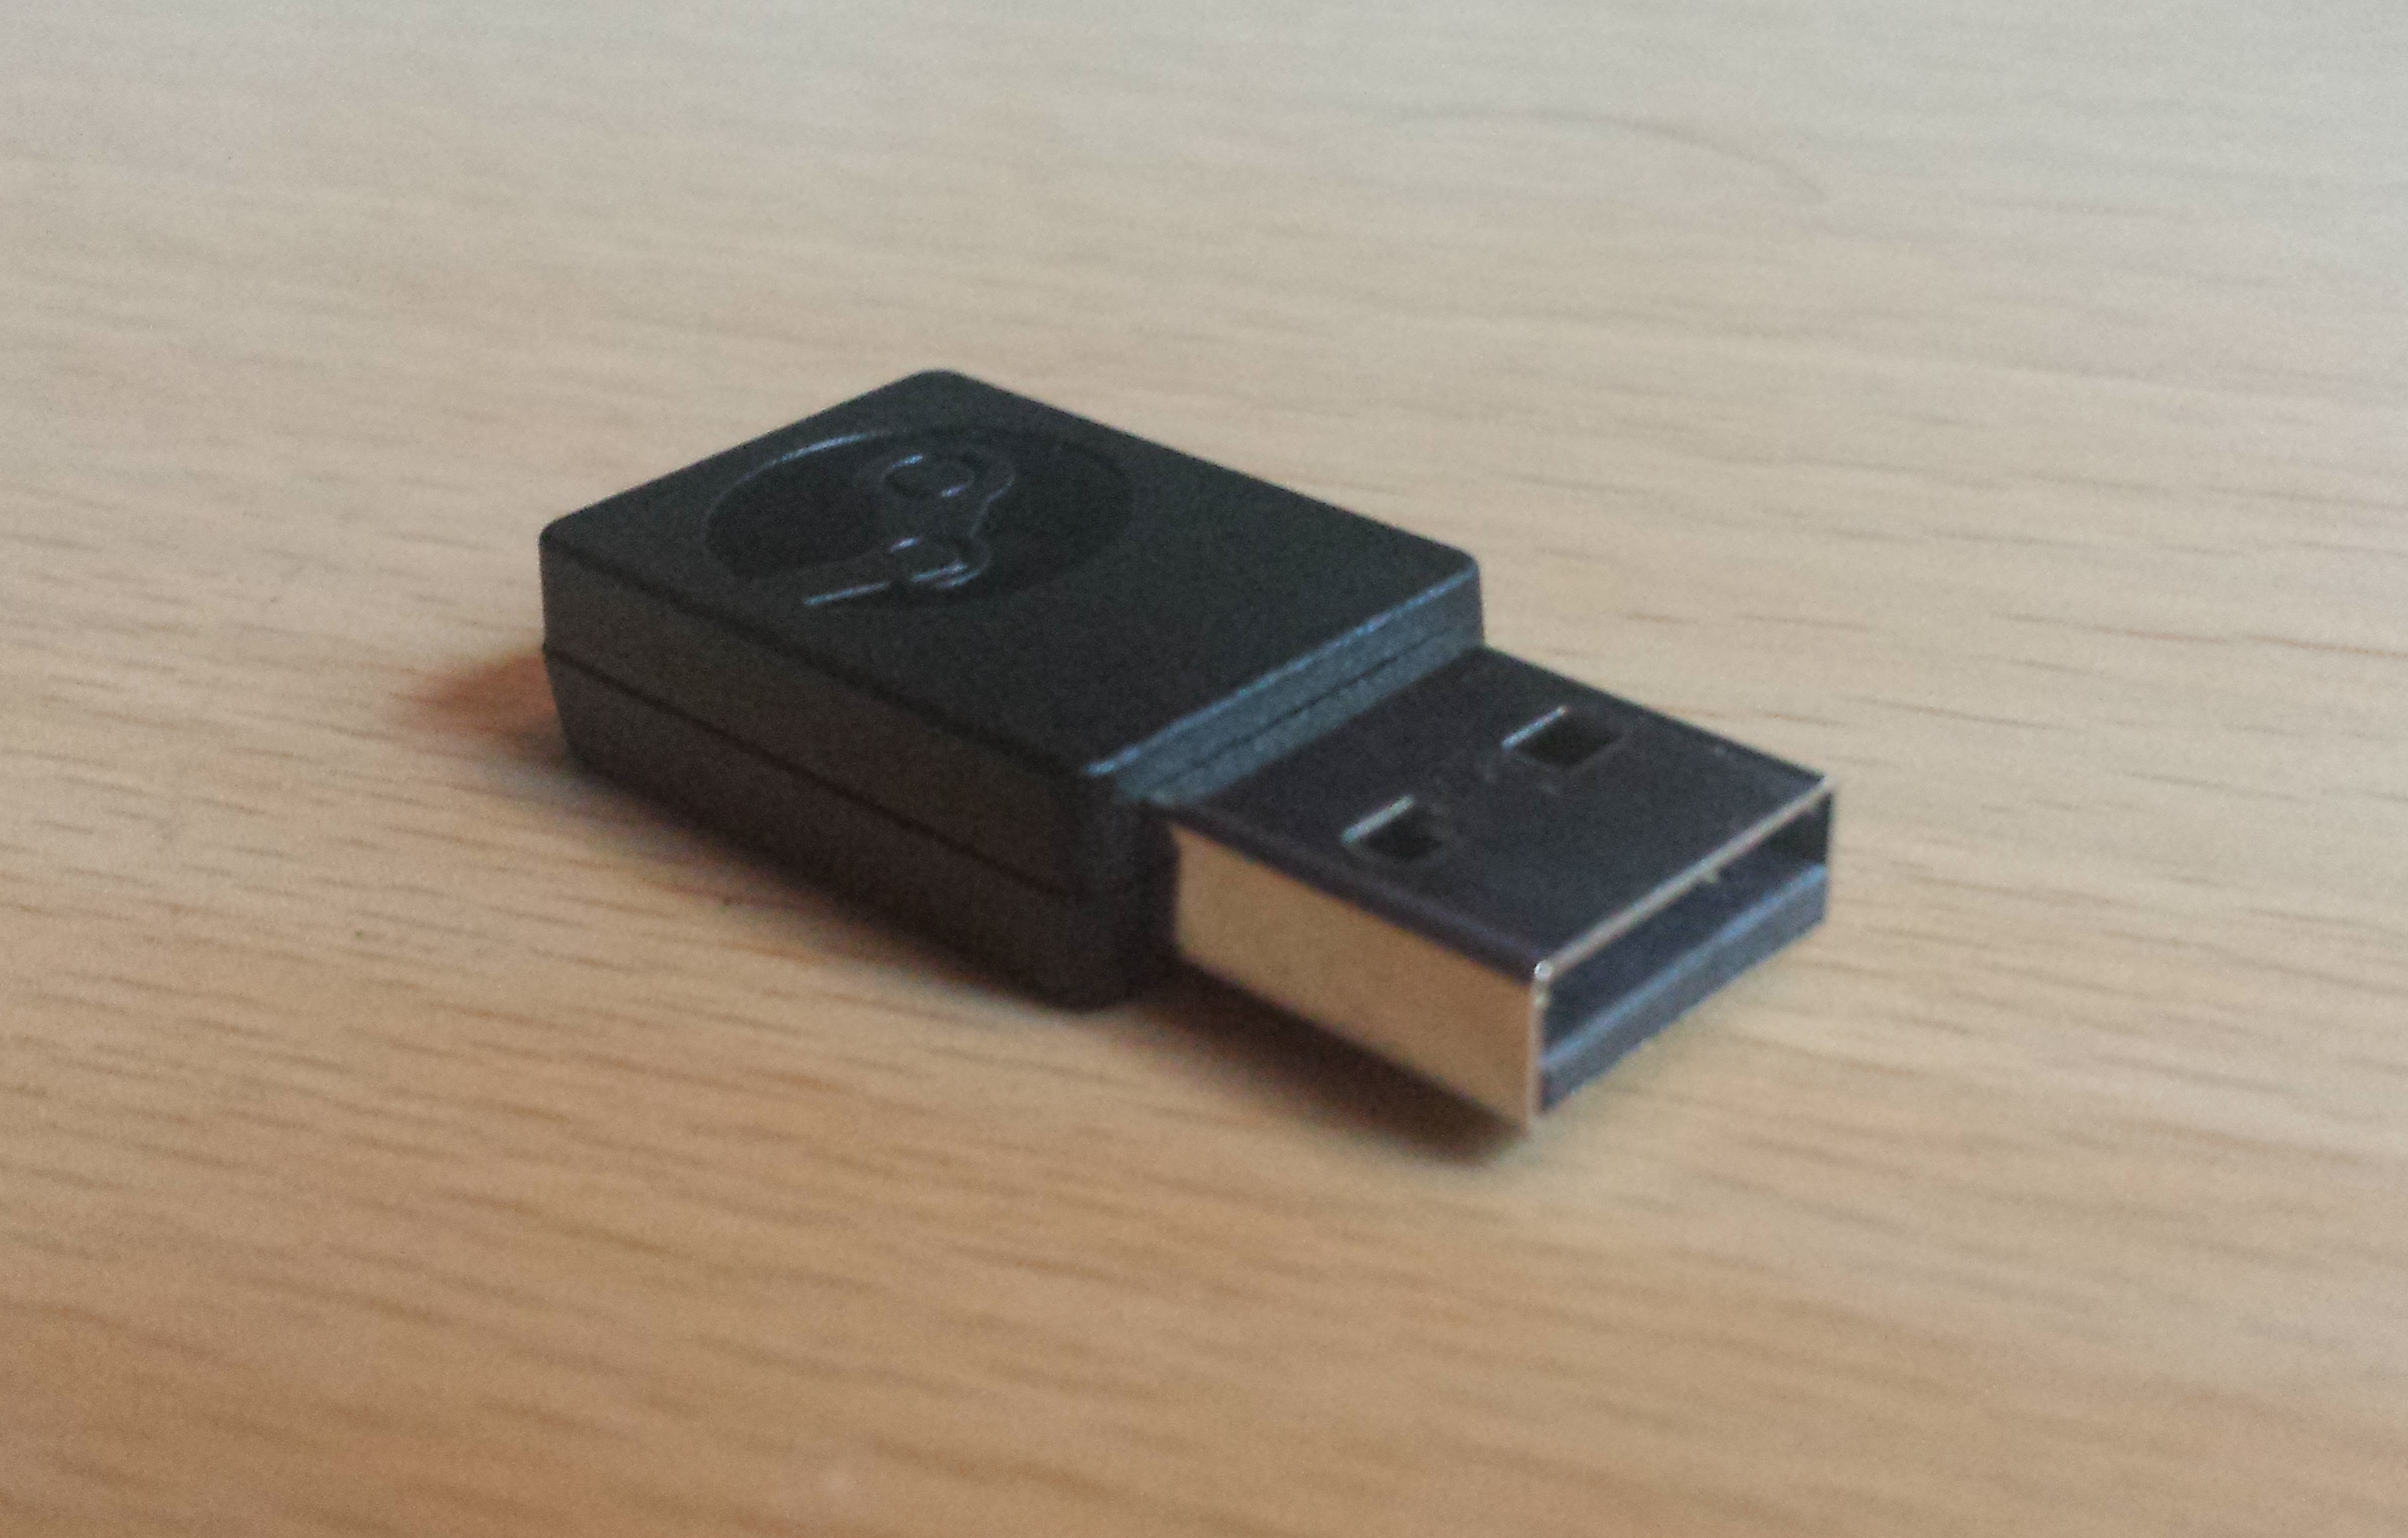 It's just a USB dongle!